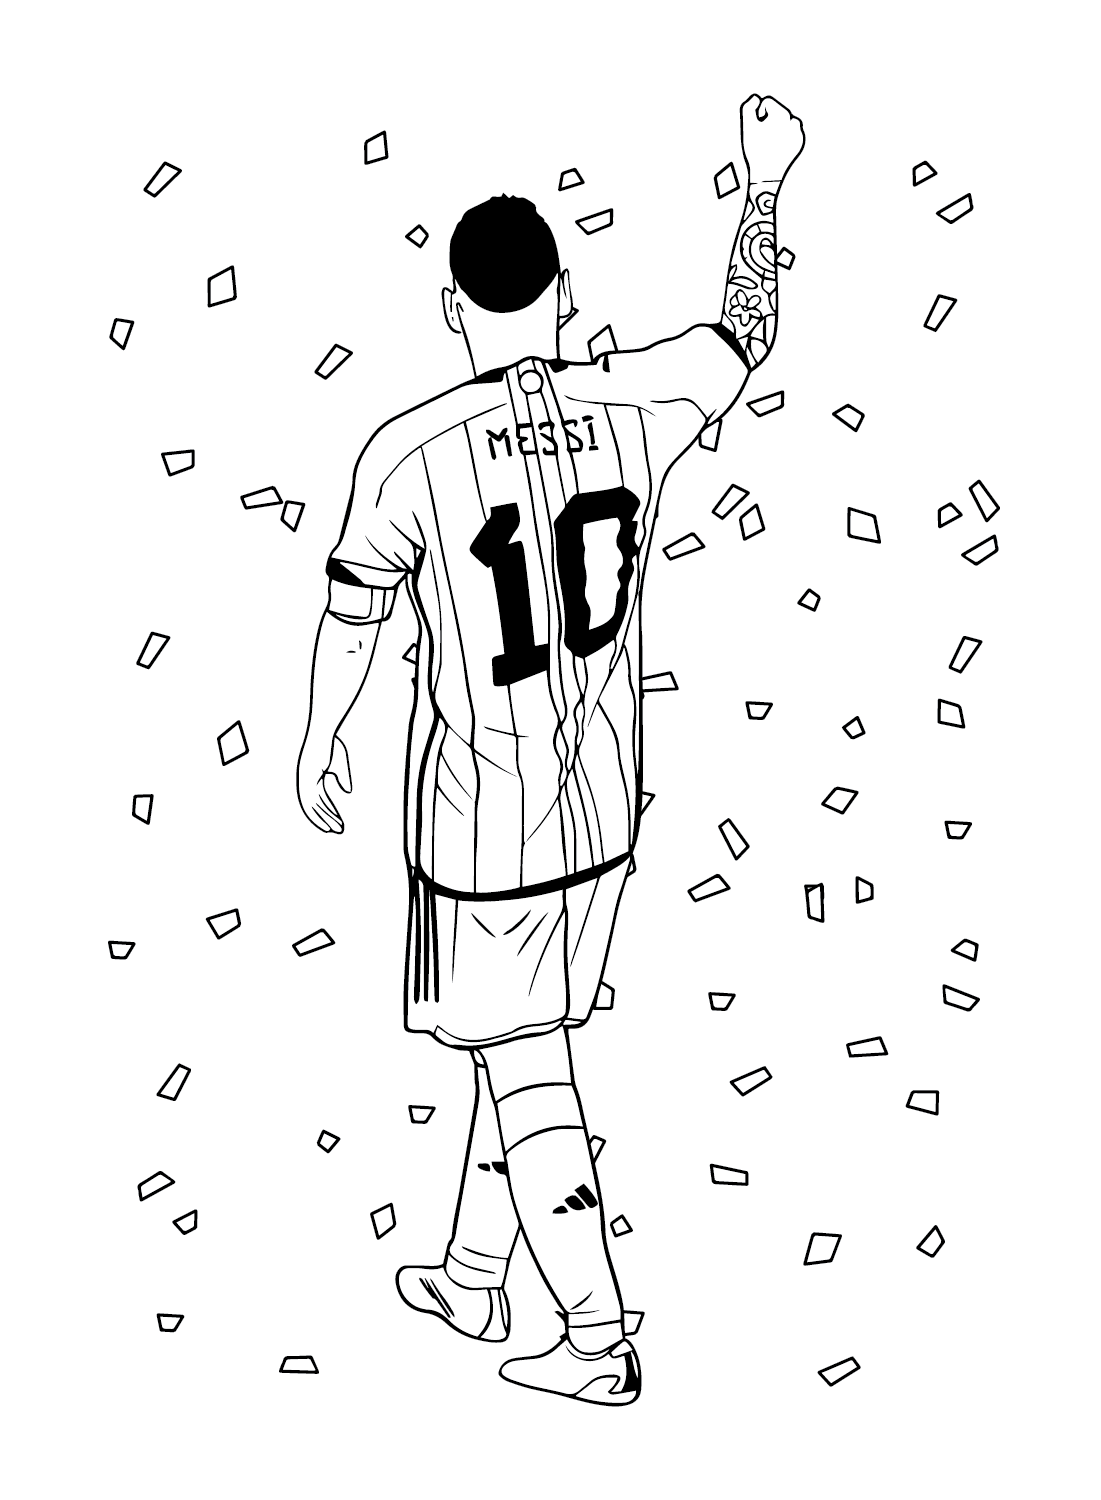 Messi can Color from Lionel Messi